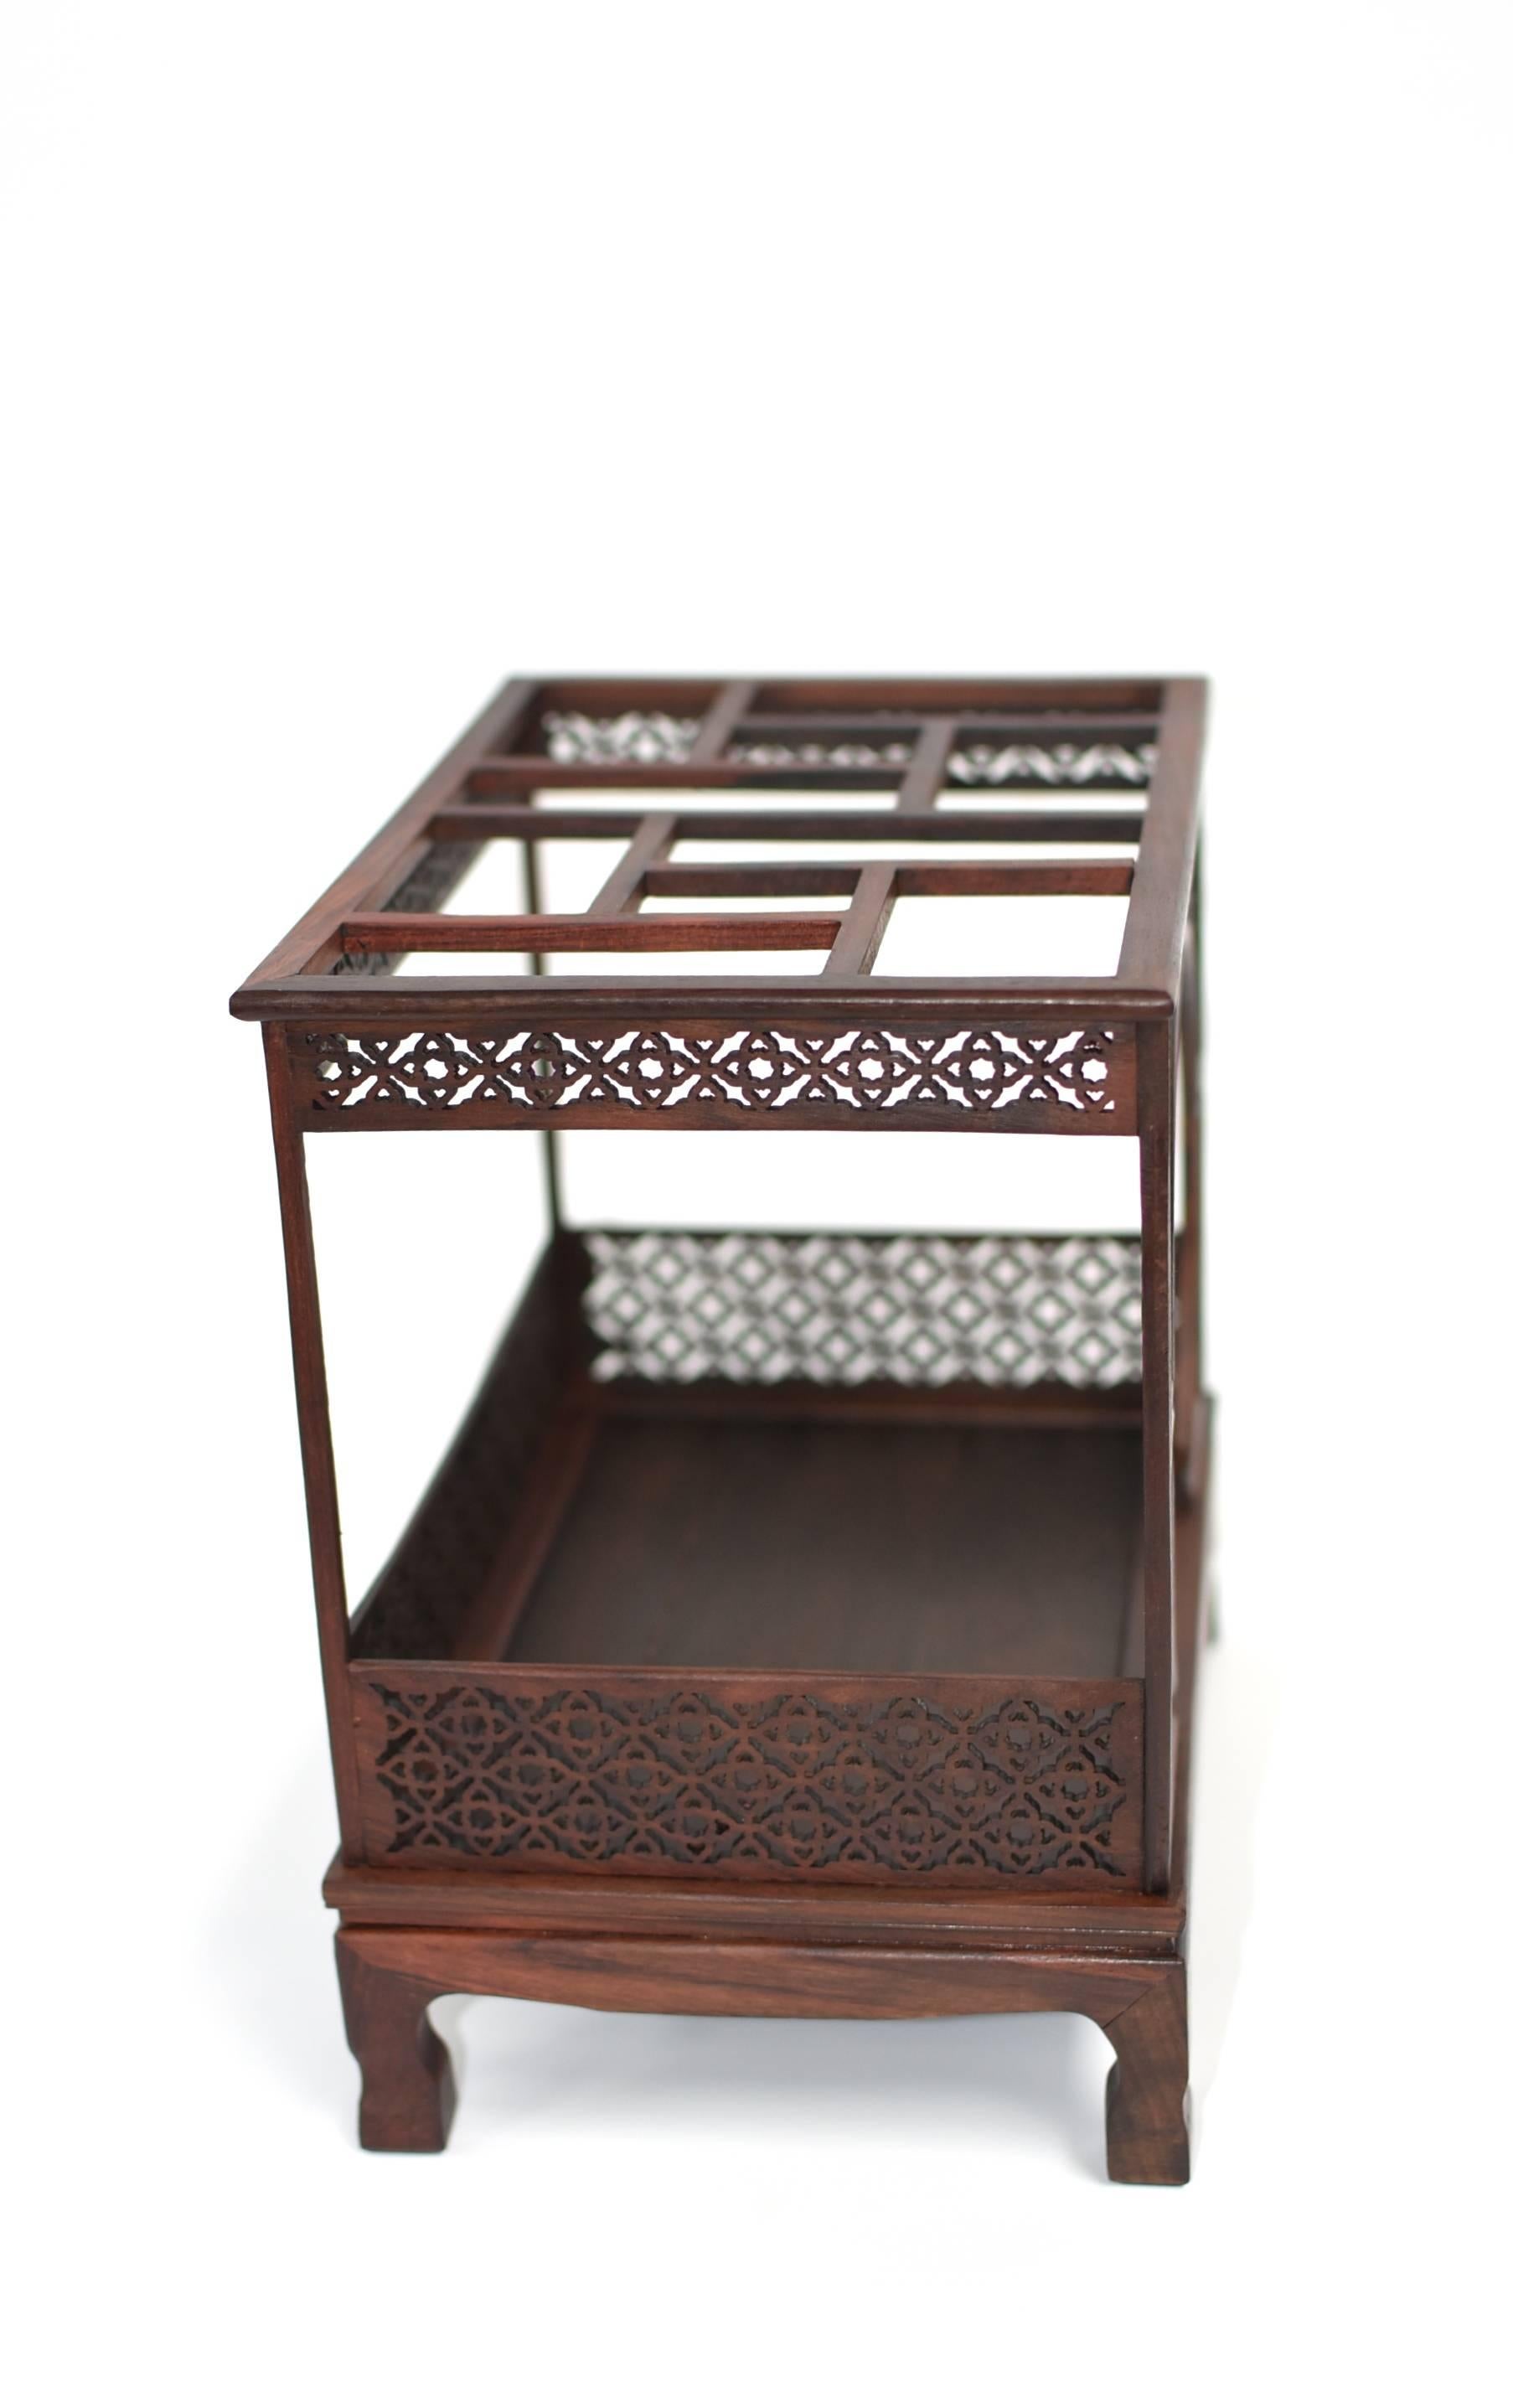 Mini Chinese Moon Bed, Rosewood Model of Bed 4